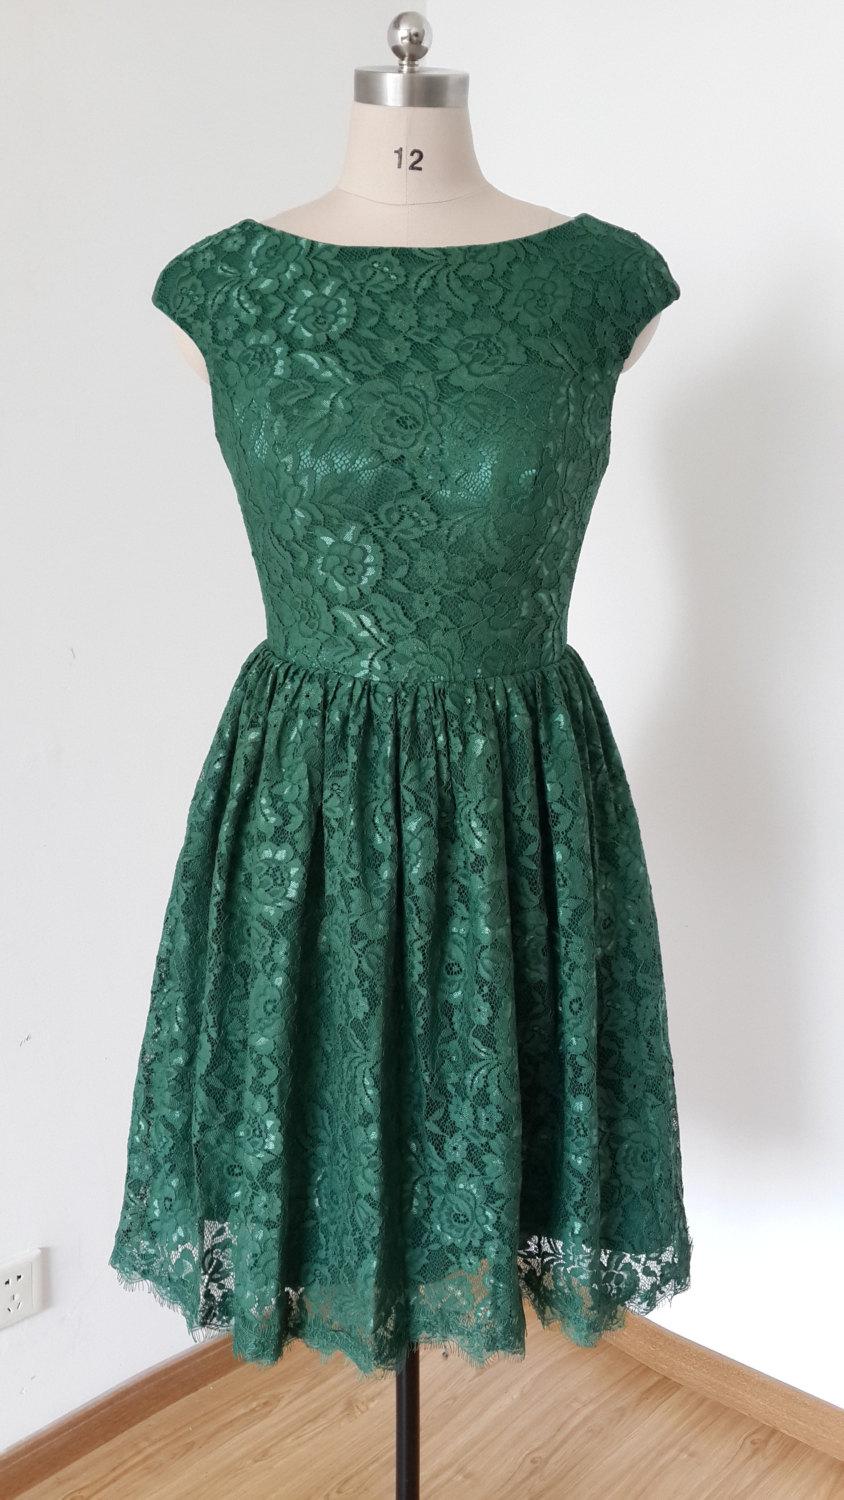 Mariage - 2015 Cap Sleeves Dark Green Lace Short Bridesmaid Dress with Back Buttons